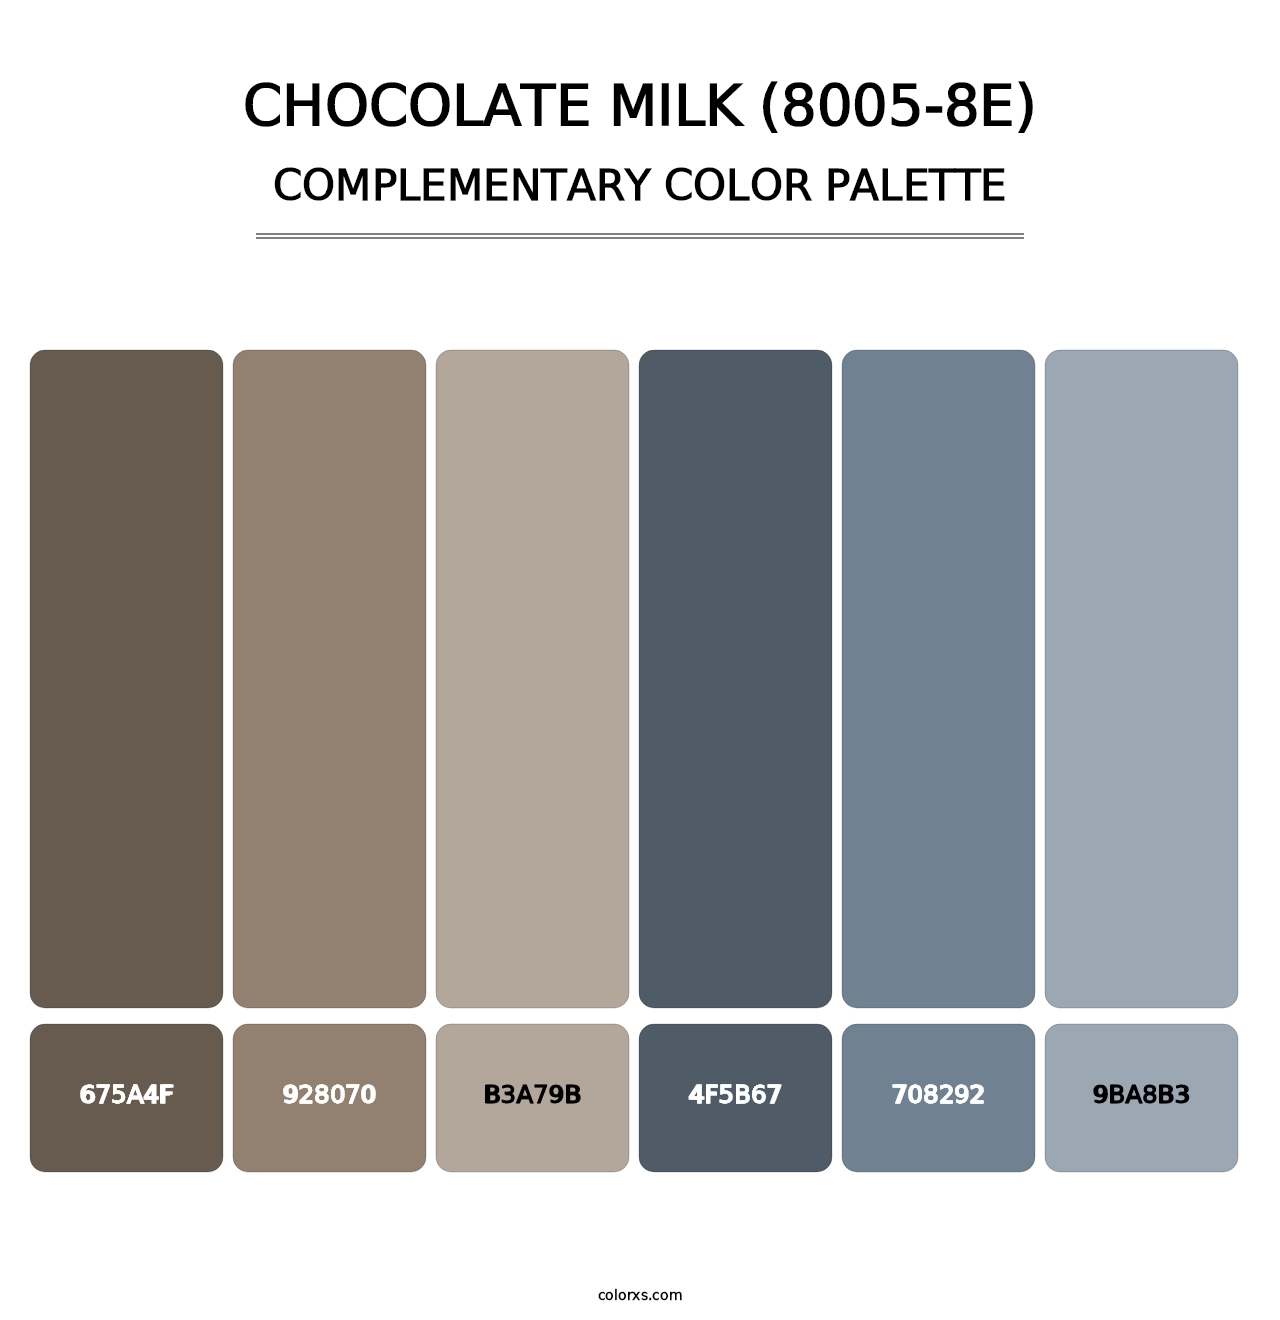 Chocolate Milk (8005-8E) - Complementary Color Palette